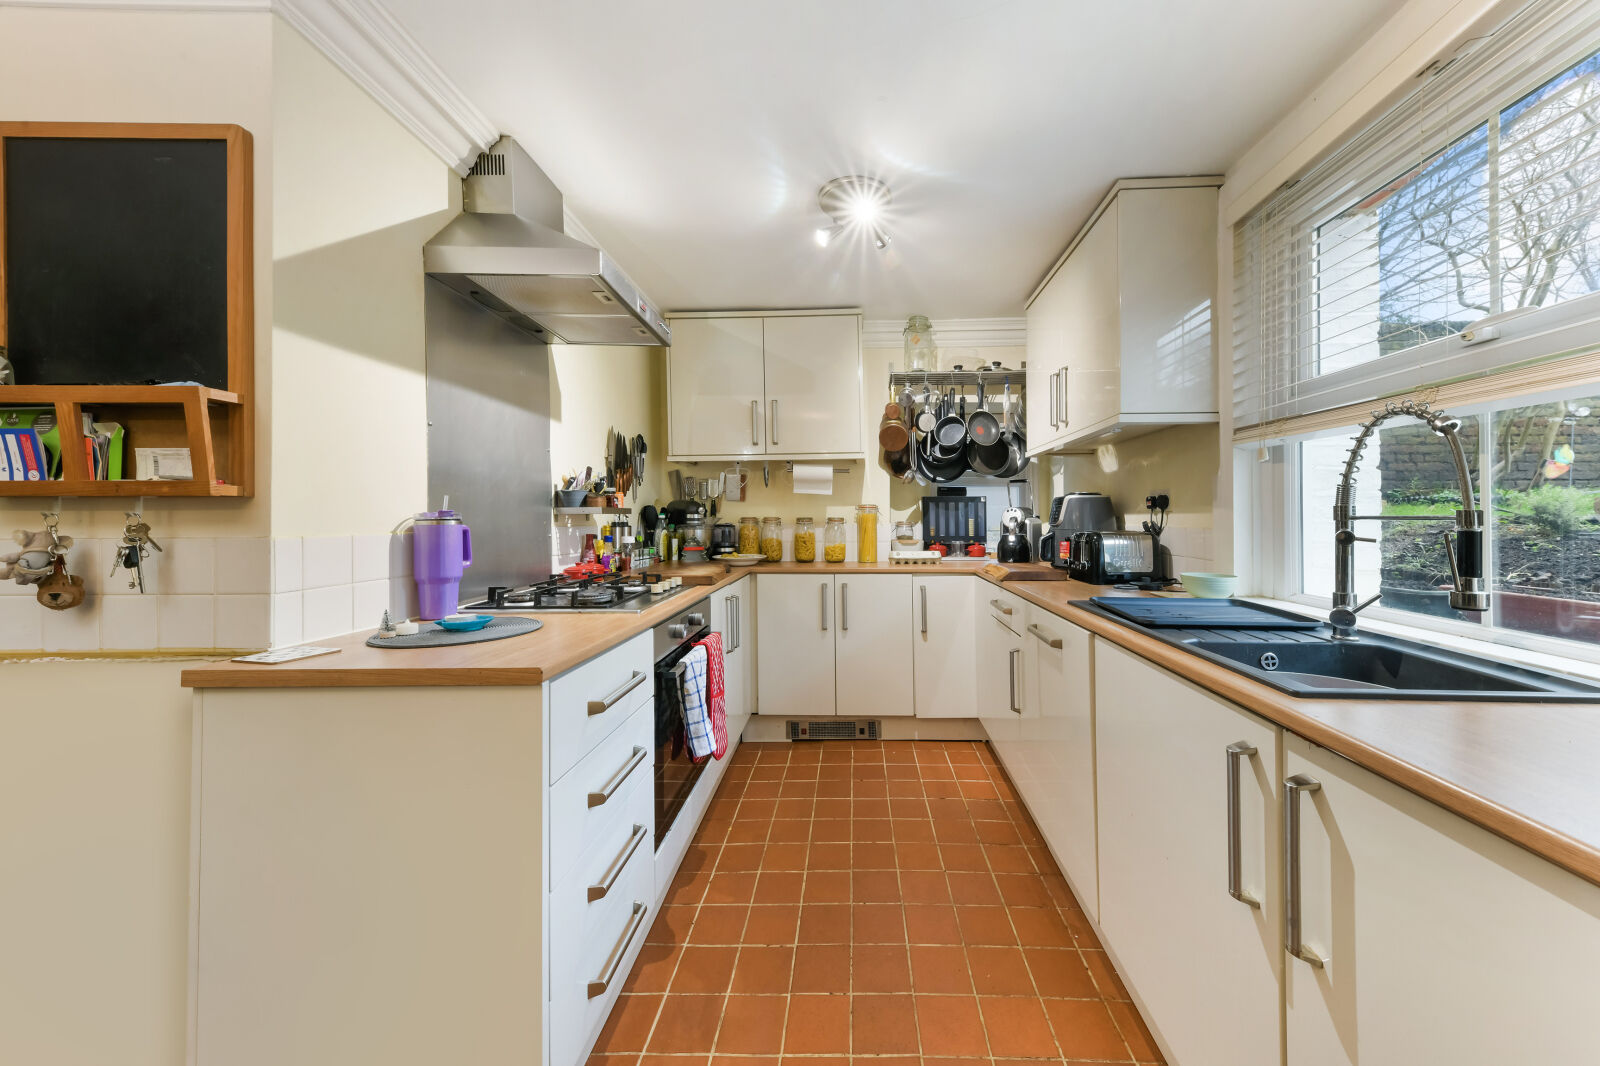 2 bedroom  flat to rent, Available now Cadogan Road, Surbiton, KT6, main image